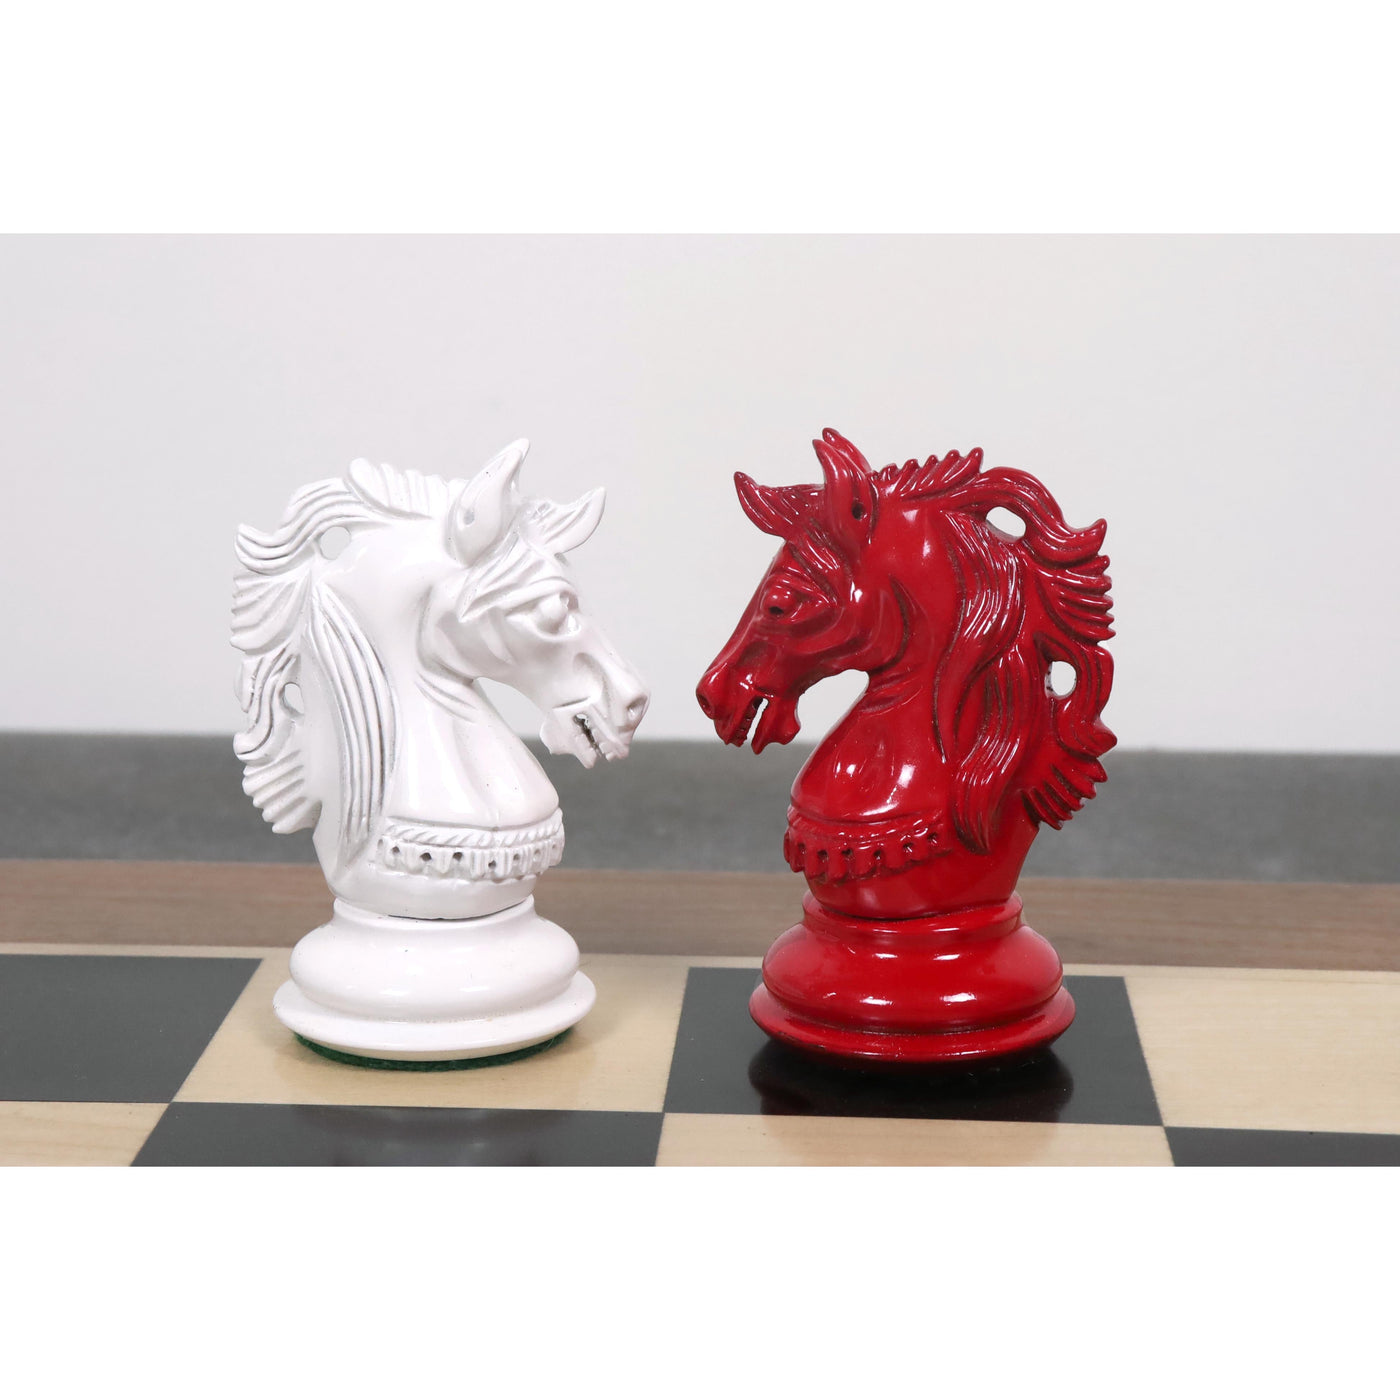 Slightly Imperfect 4.6" Prestige Luxury Staunton Chess Set - Chess Pieces Only- White & Red Lacquer Boxwood